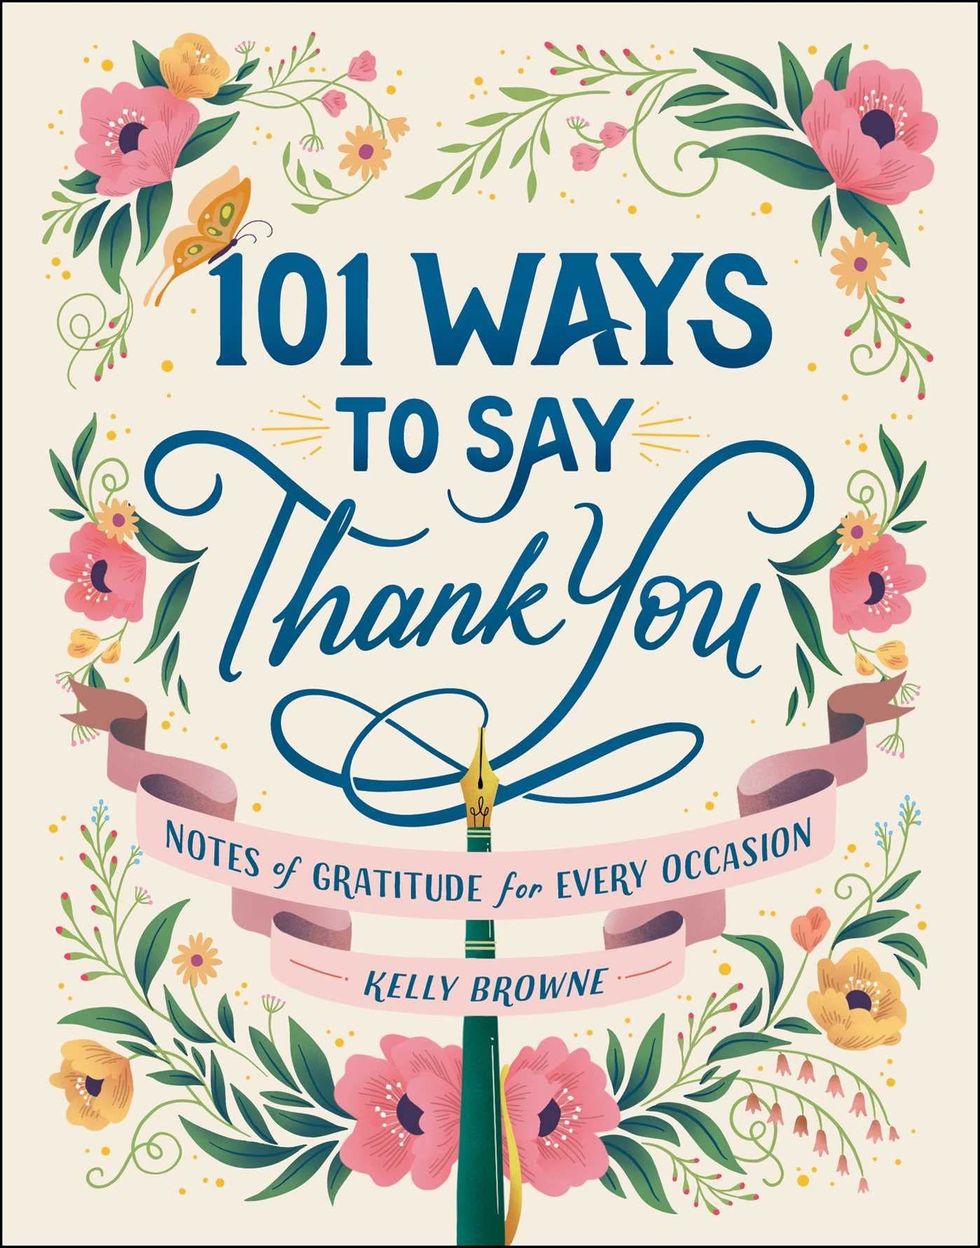 How to Write an Impactful Thank-You Card